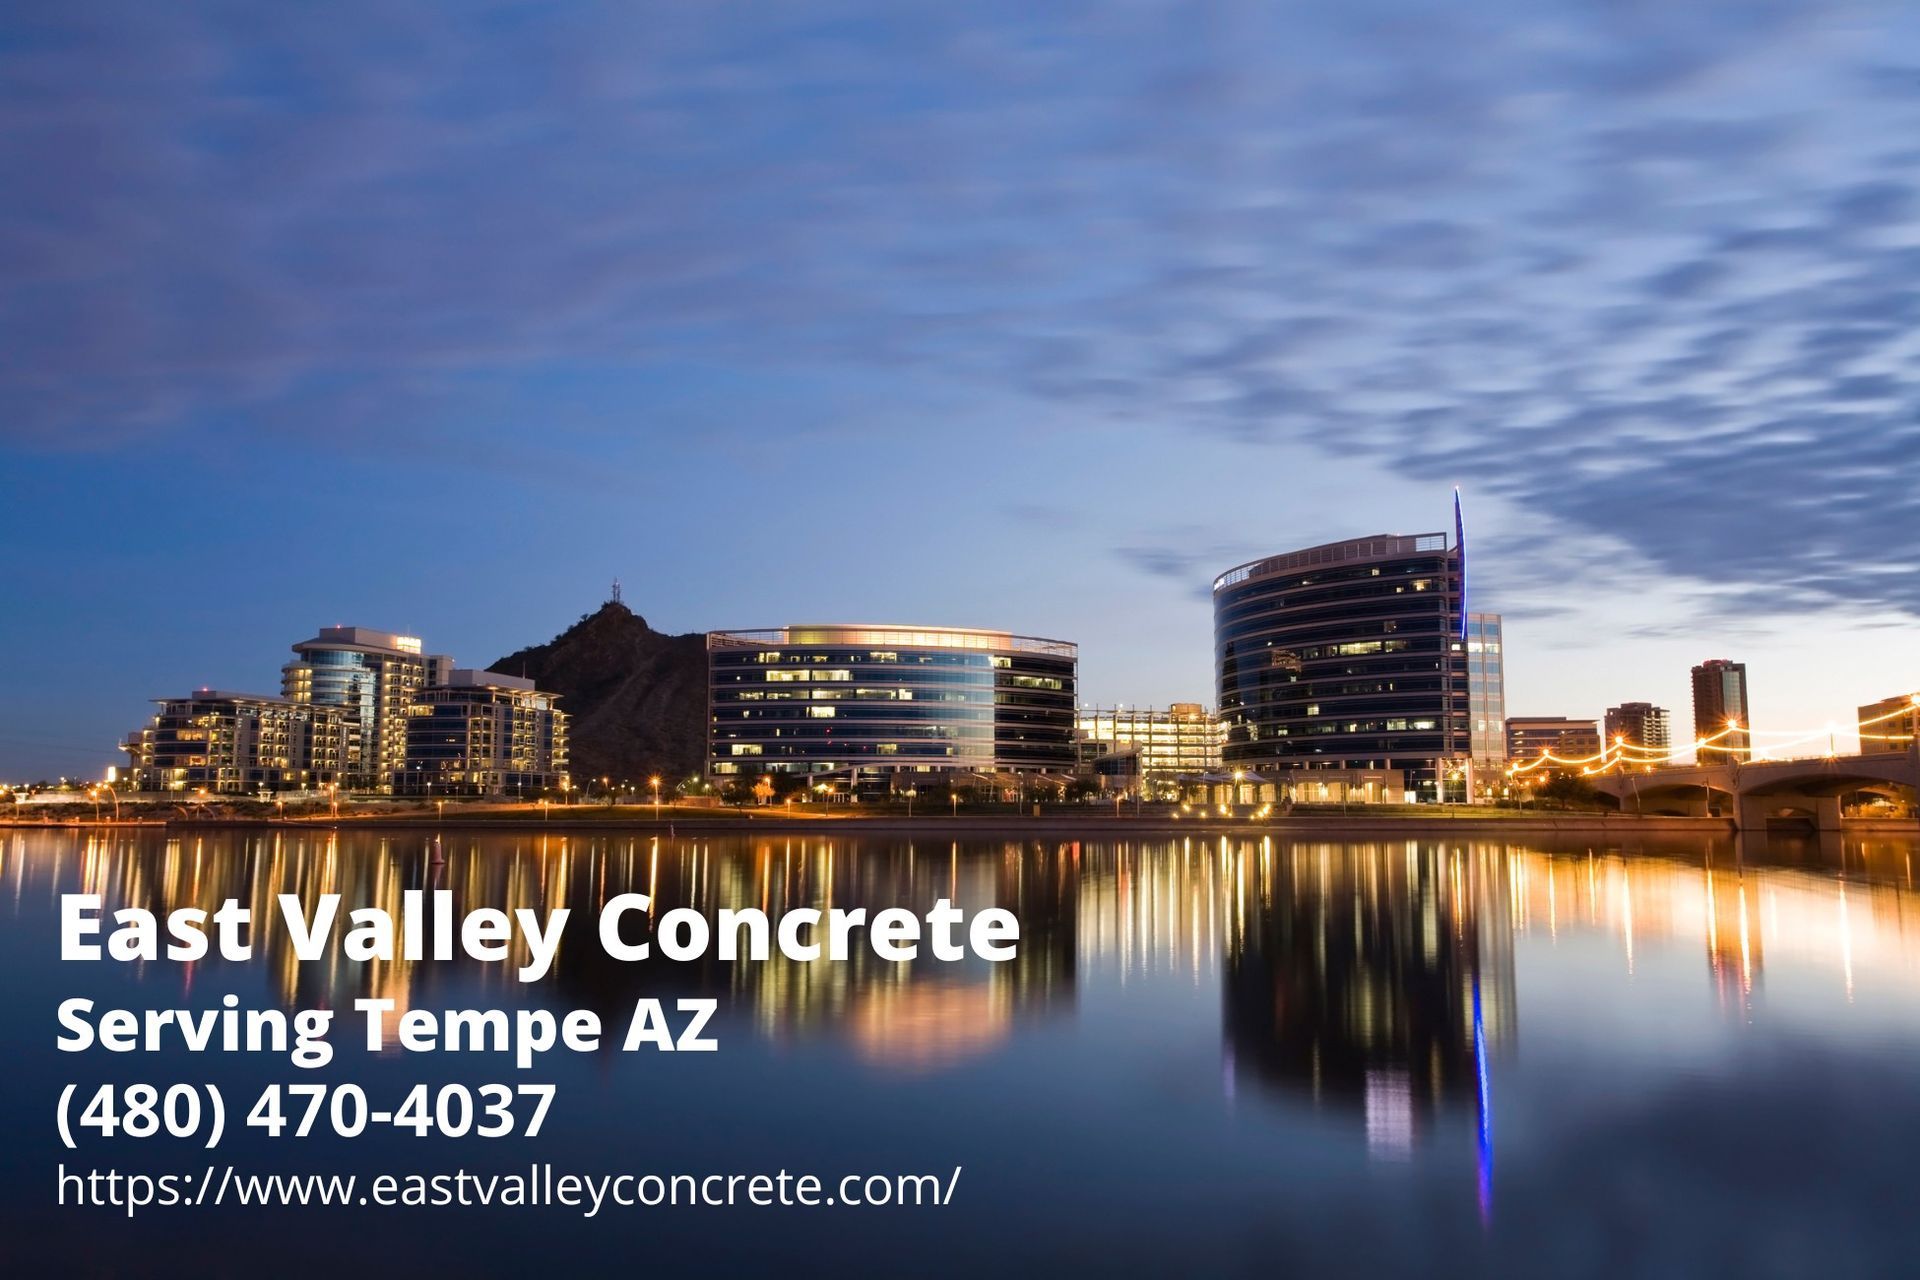 downtown Tempe AZ at nighttime with the business info of East Valley Concrete